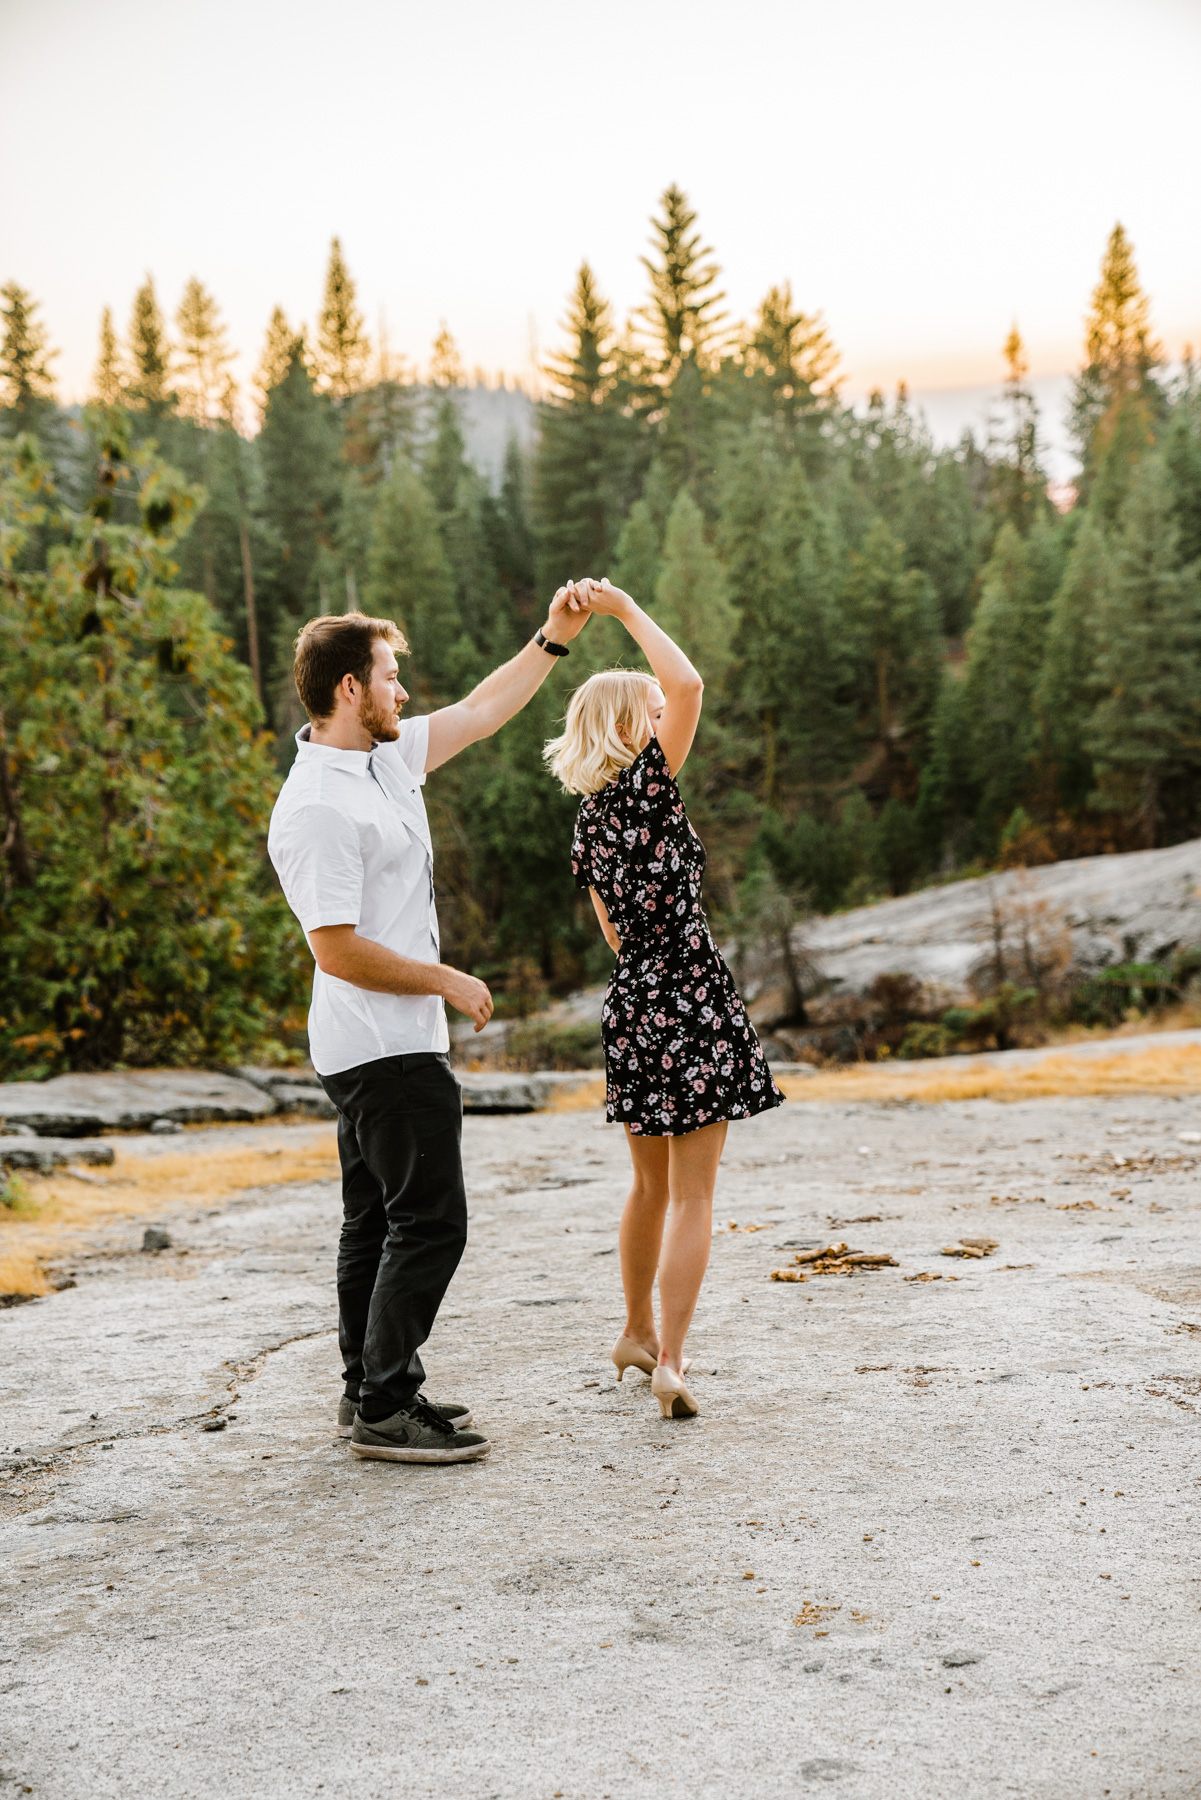 Shaver Lake Engagement Portraits - Meghan and Clay -  by Bessie Young Photography 2018 A7R2-252.jpg